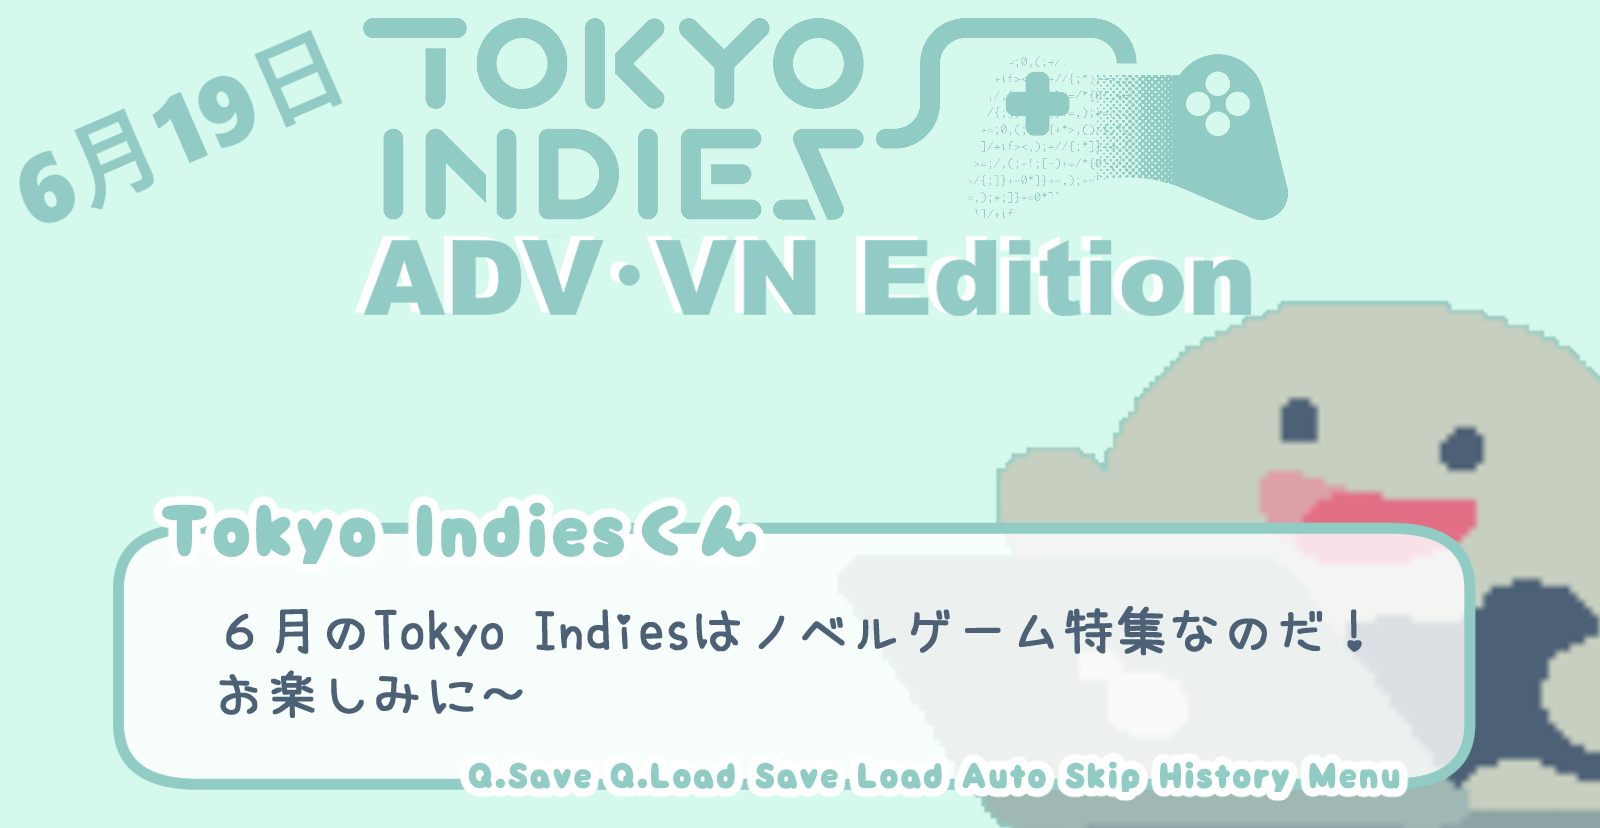 image from April Tokyo Indies: VN/ADV Edition